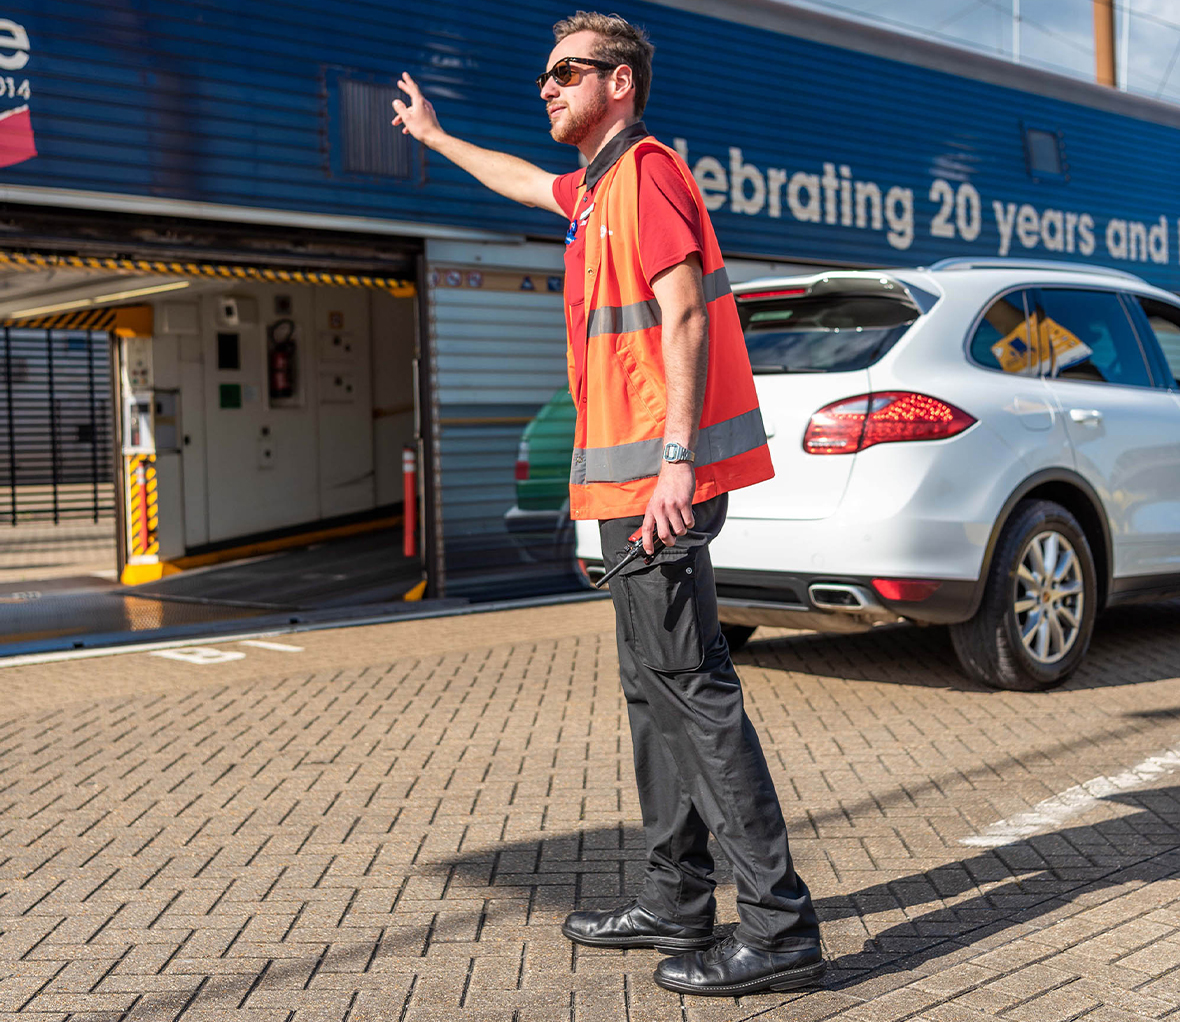 Man with brown hair and beard wearing sunglasses a bright orange vest and dark trousers signalling with his arms to cars to board them on a train